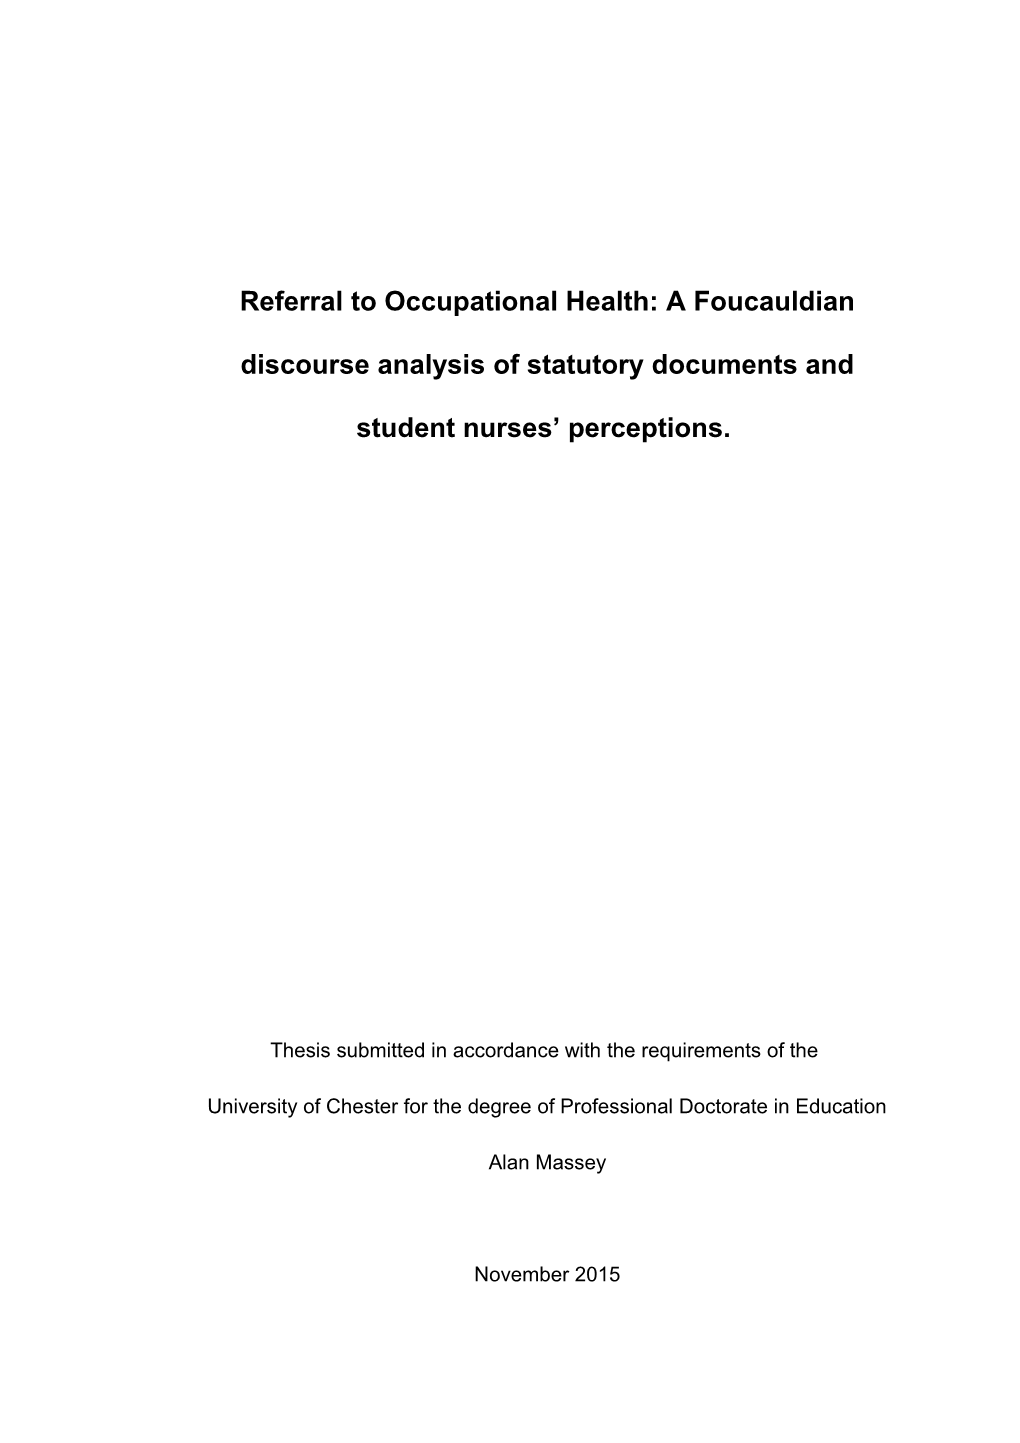 Thesis Submitted in Accordance with the Requirements of The